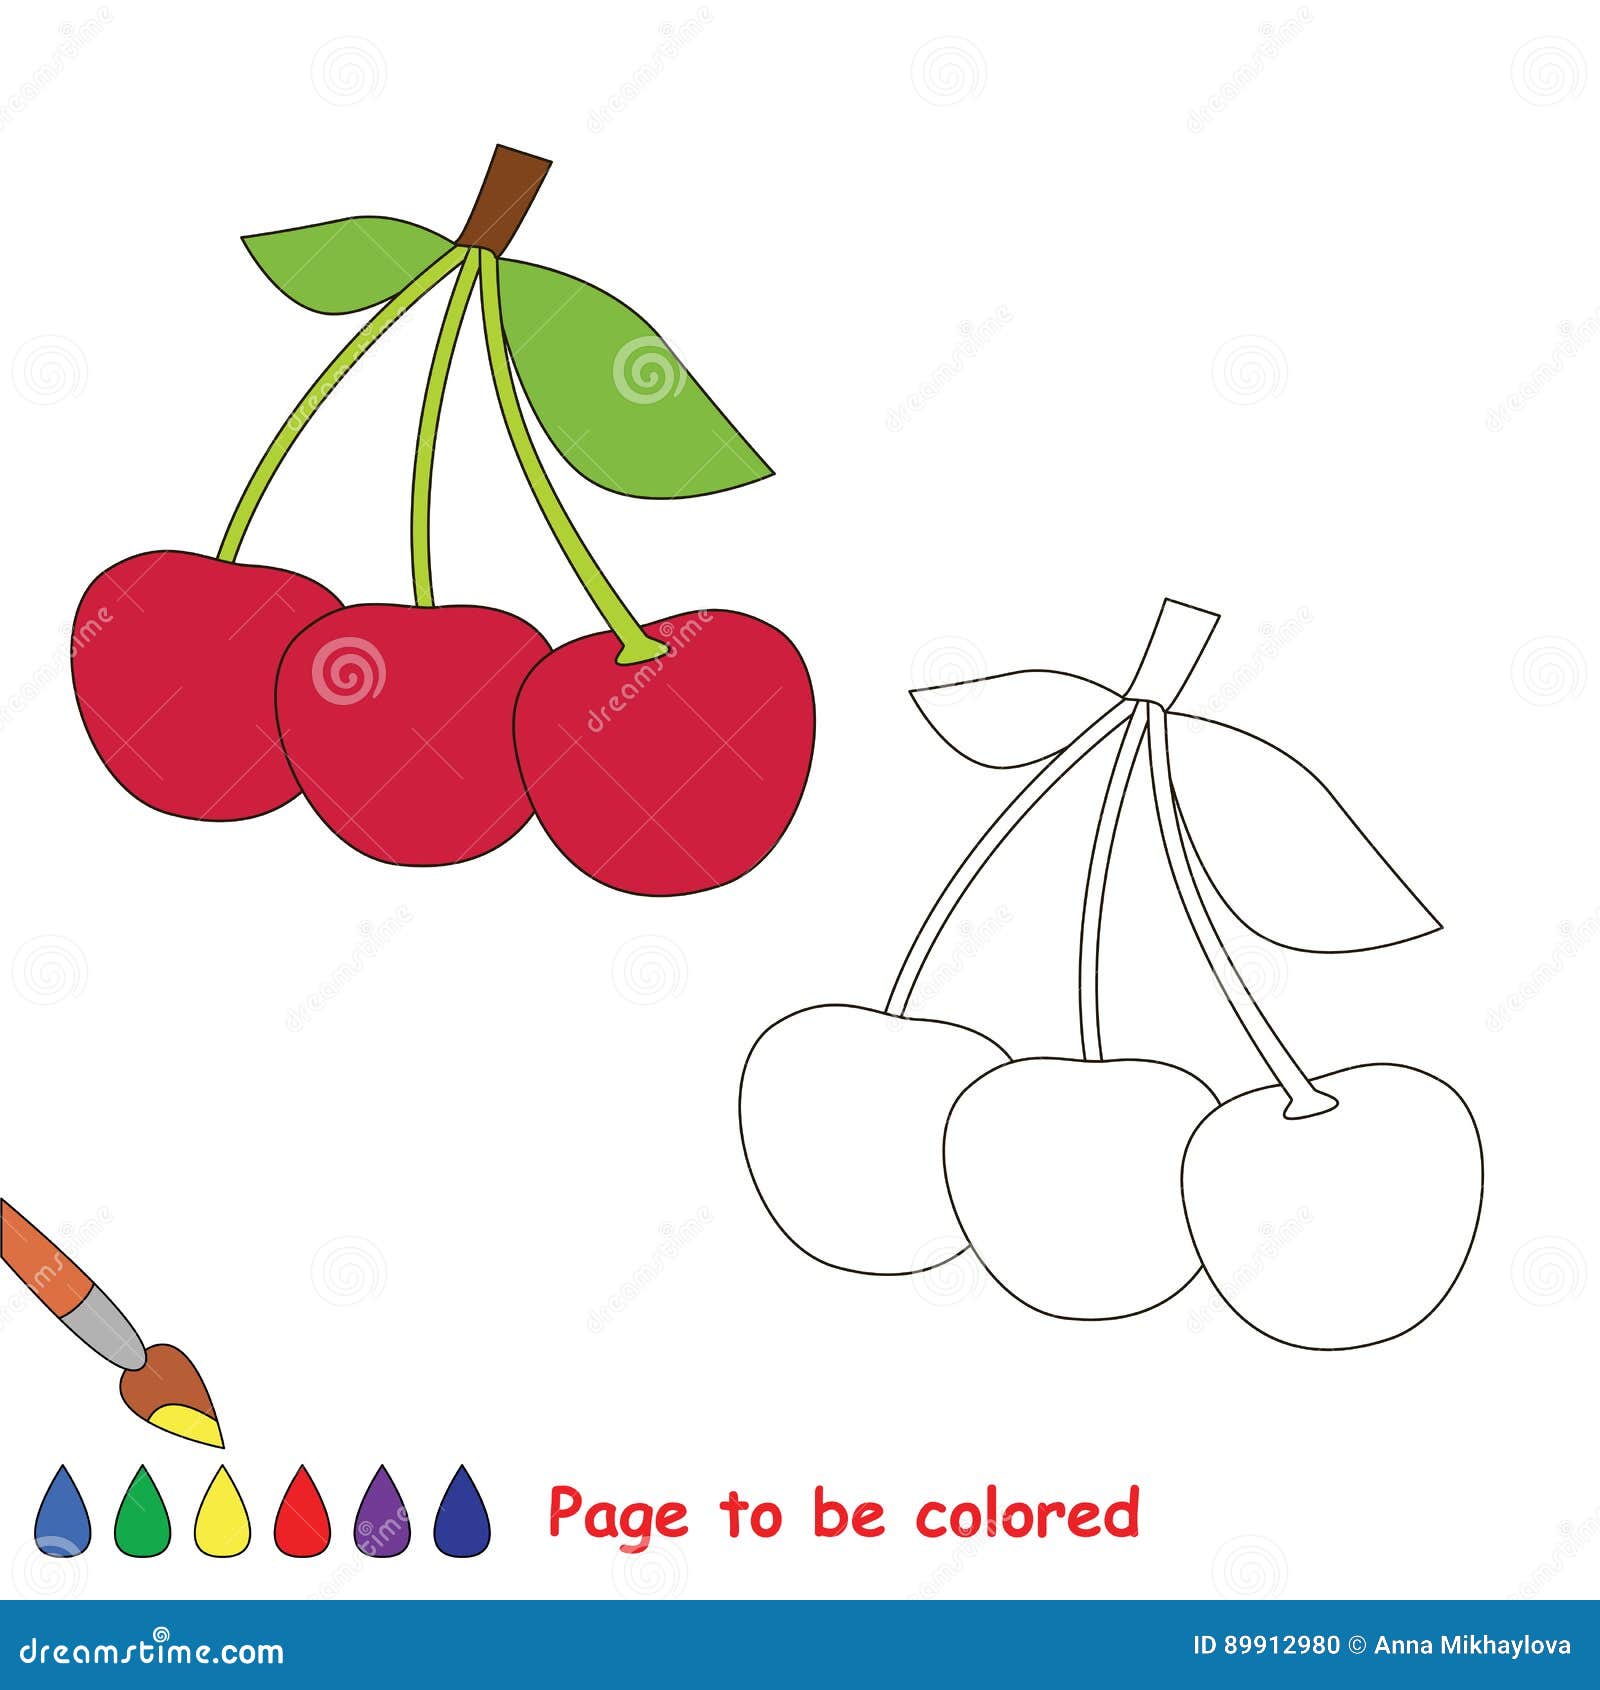 Coloring Kid Game. Educational Page To Be Colored. Stock Vector ...